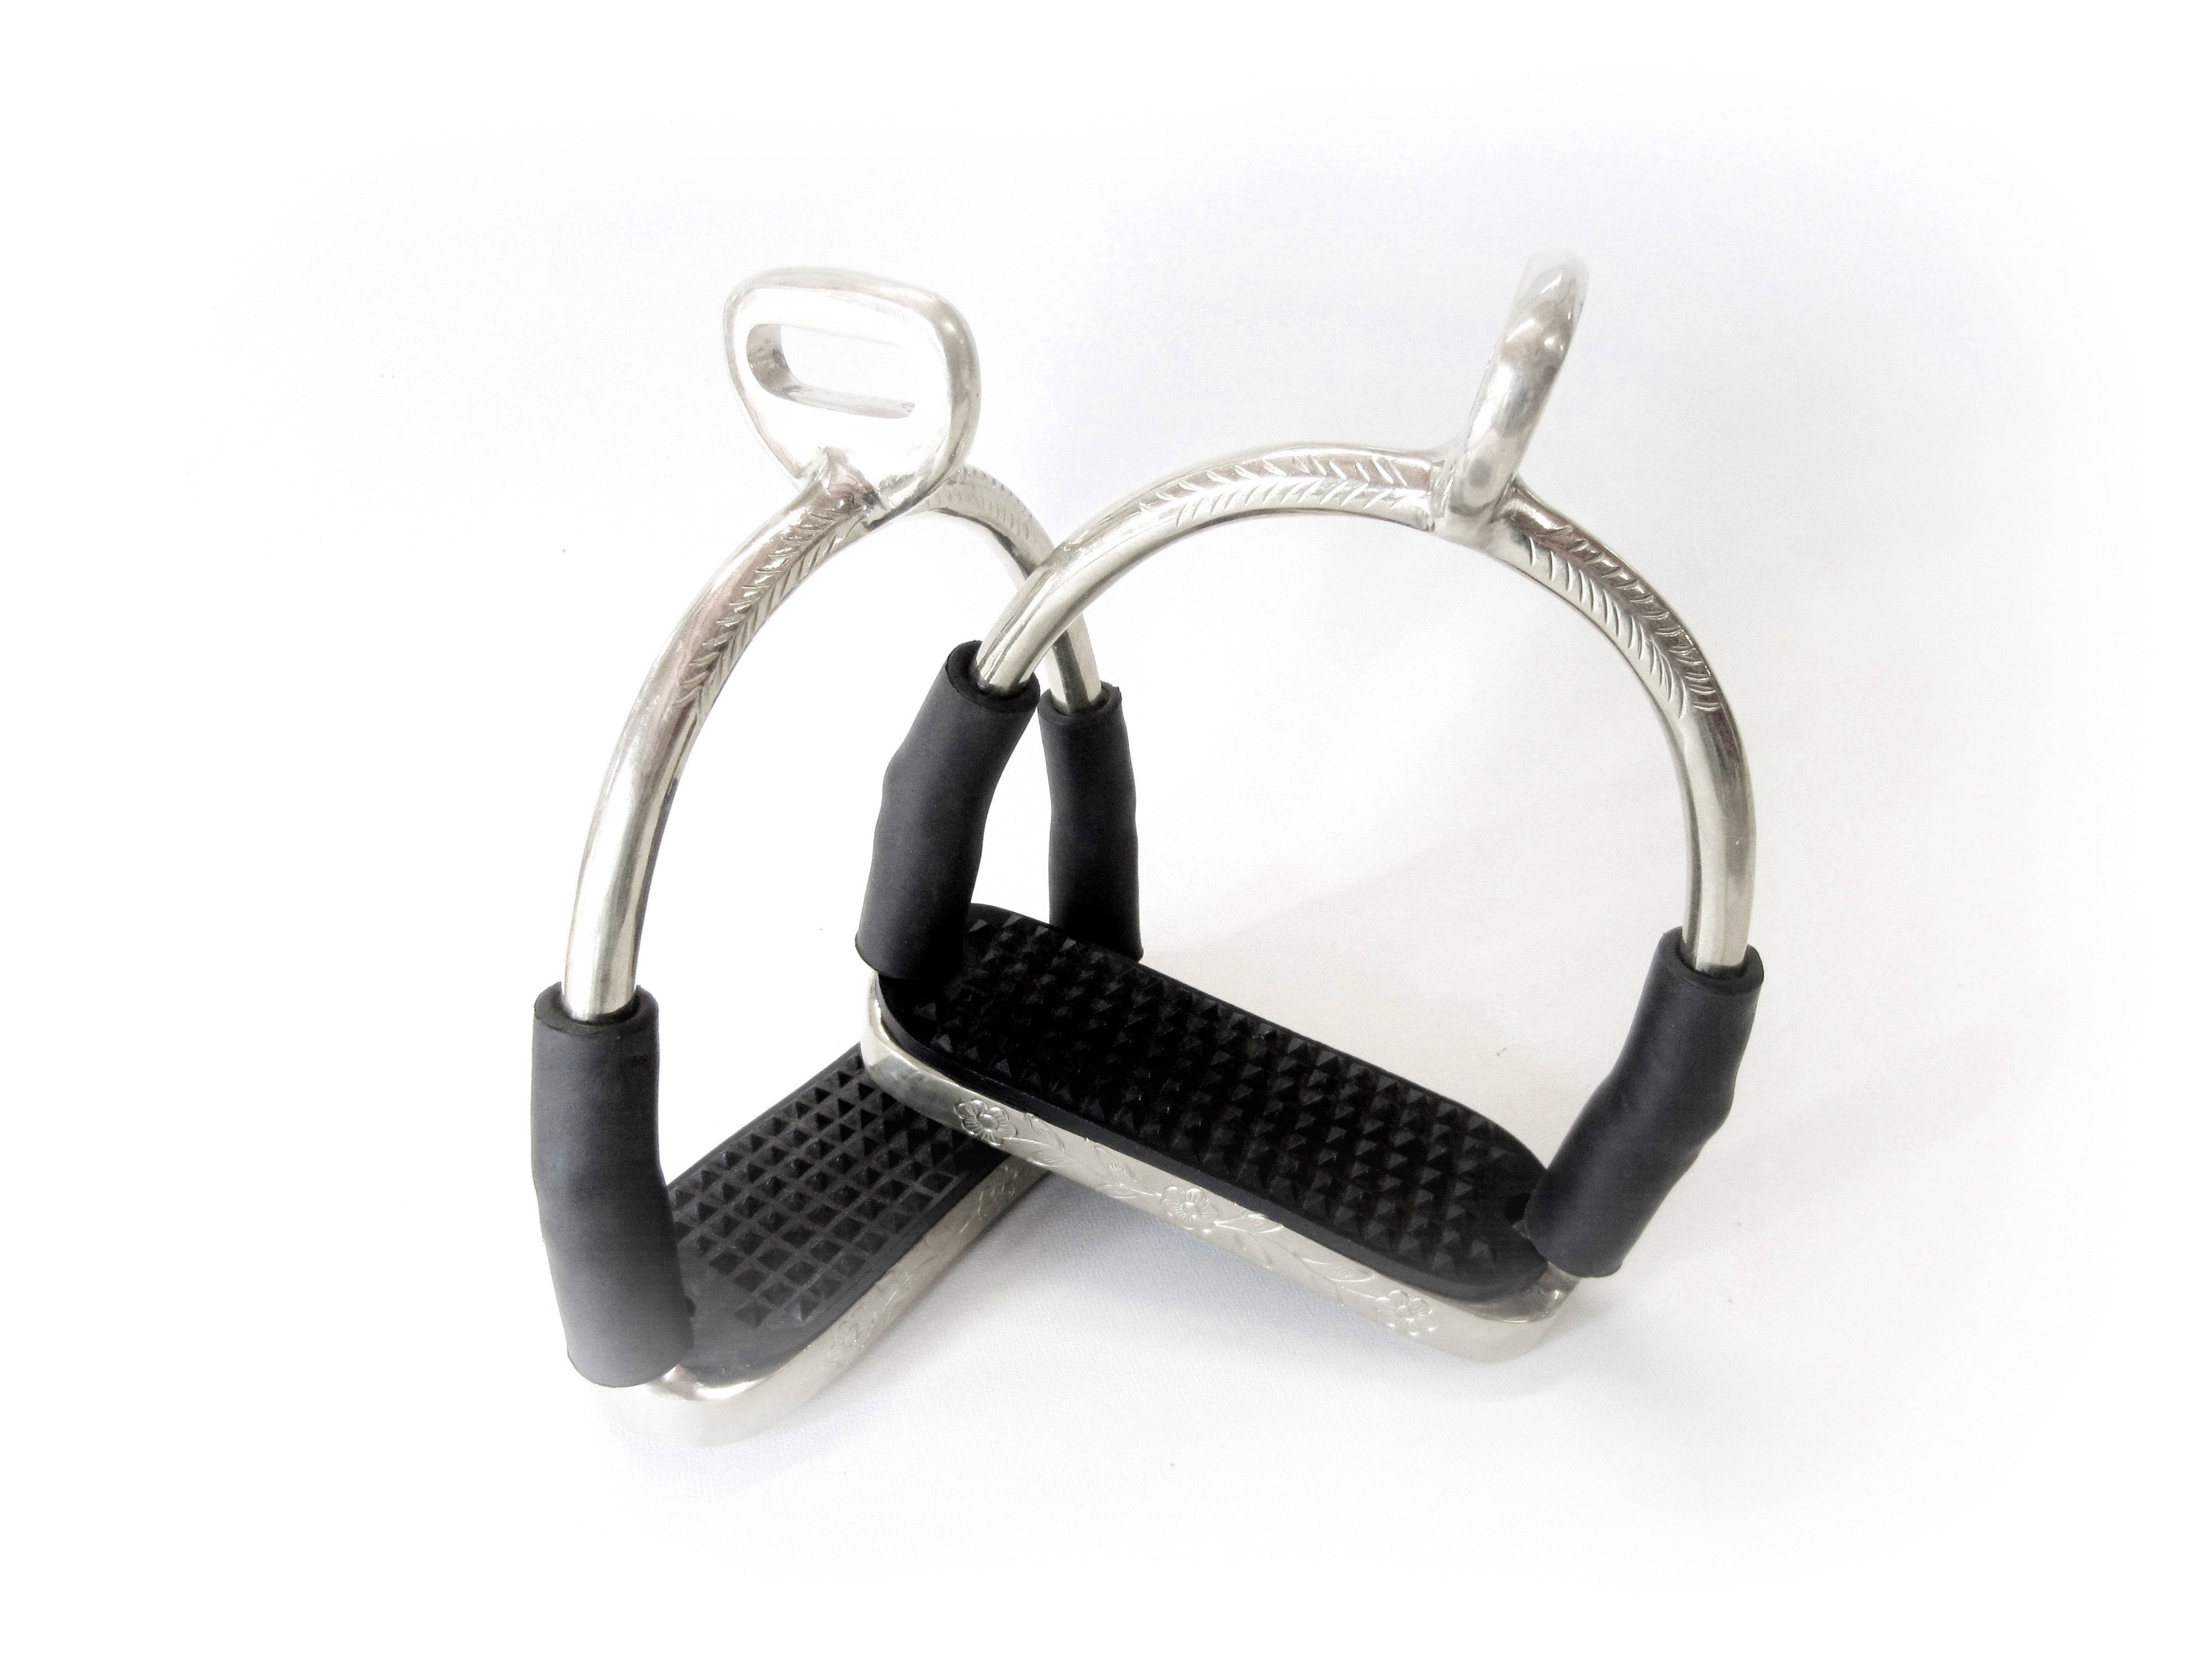 Elegant safety stirrups with joints, rotated 90°, in SILVER color, decorated, 1 pair